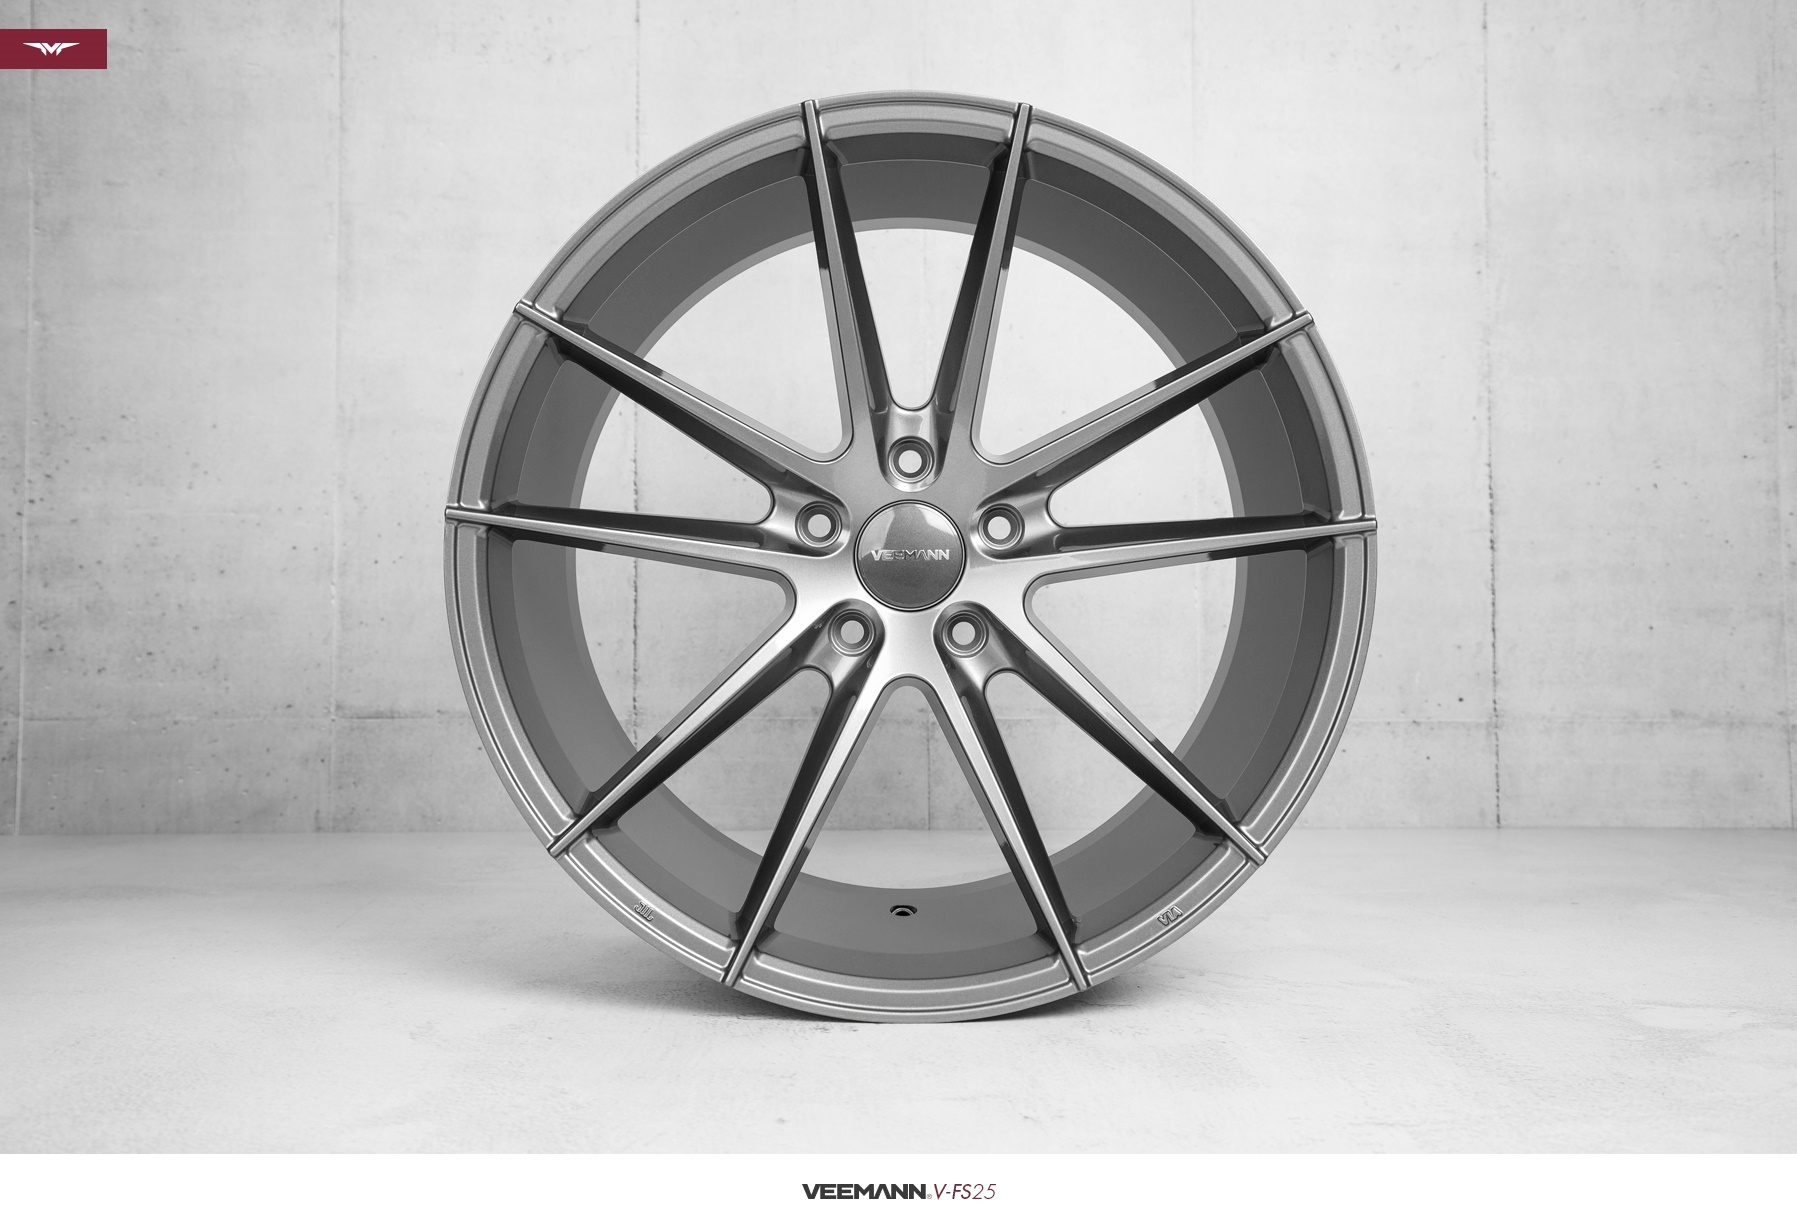 NEW 20" VEEMANN V-FS25 ALLOY WHEELS IN GLOSS GRAPHITE WITH WIDER 10" REARS